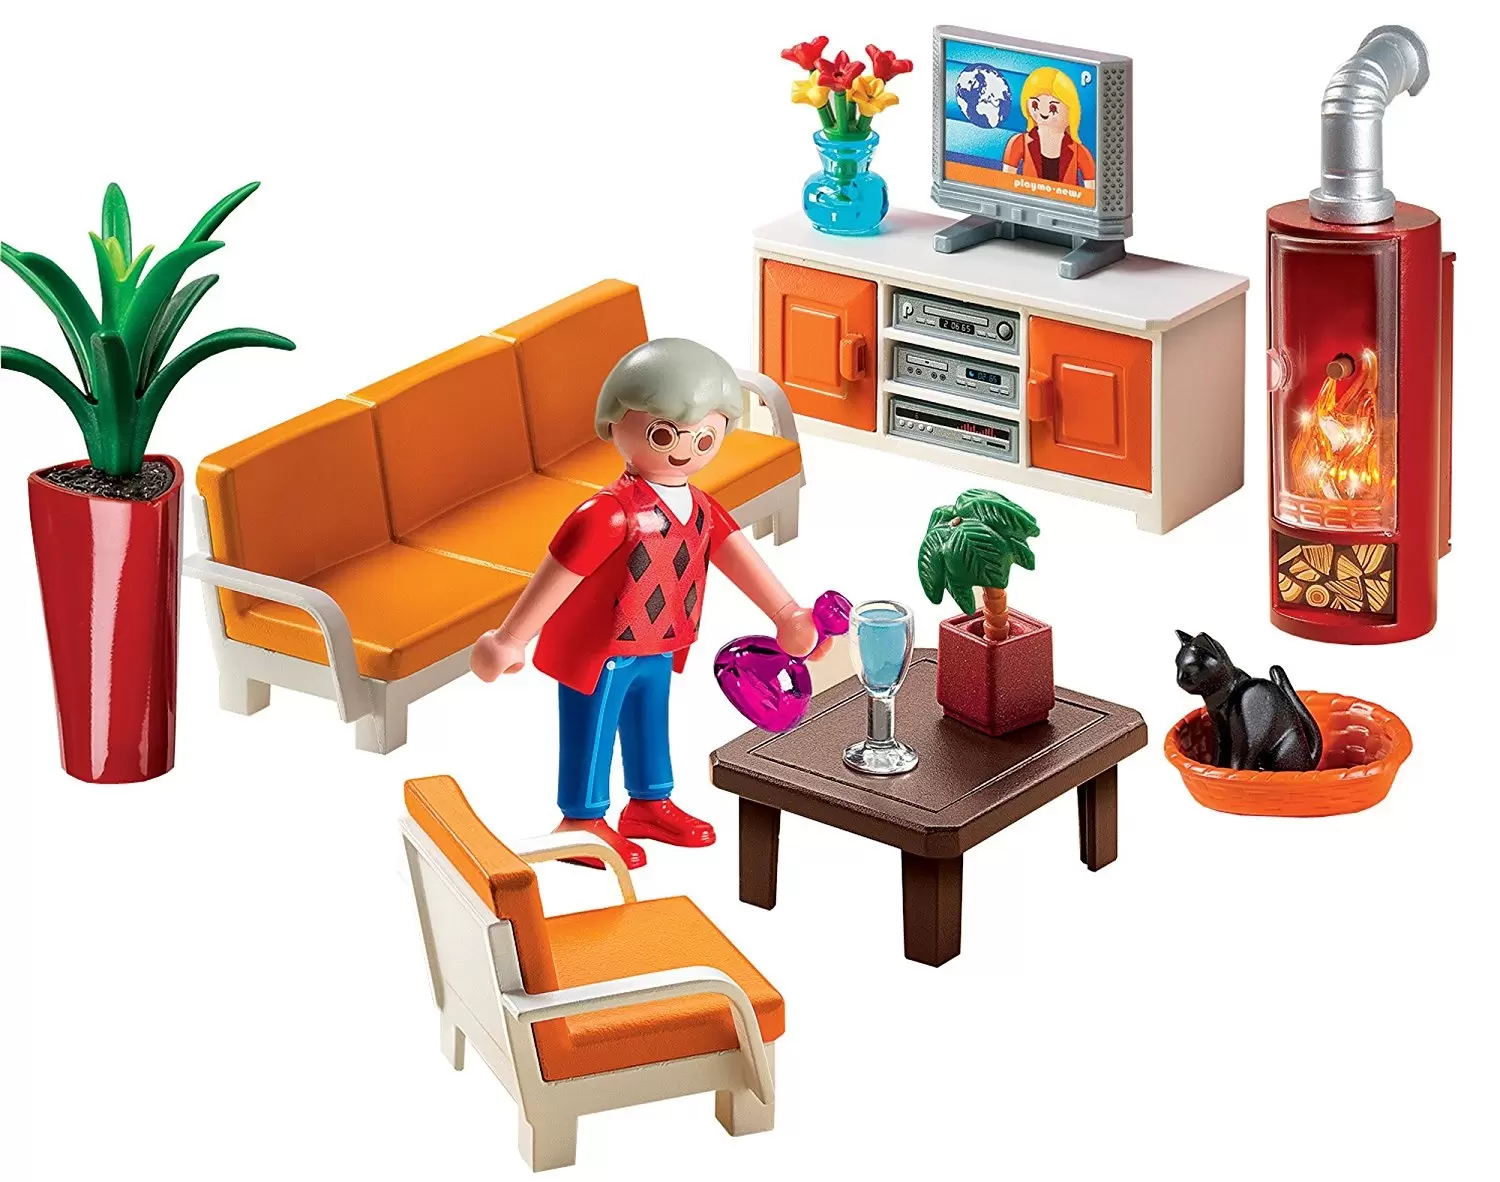 Playmobil Houses and Furniture - Comfortable Living Room